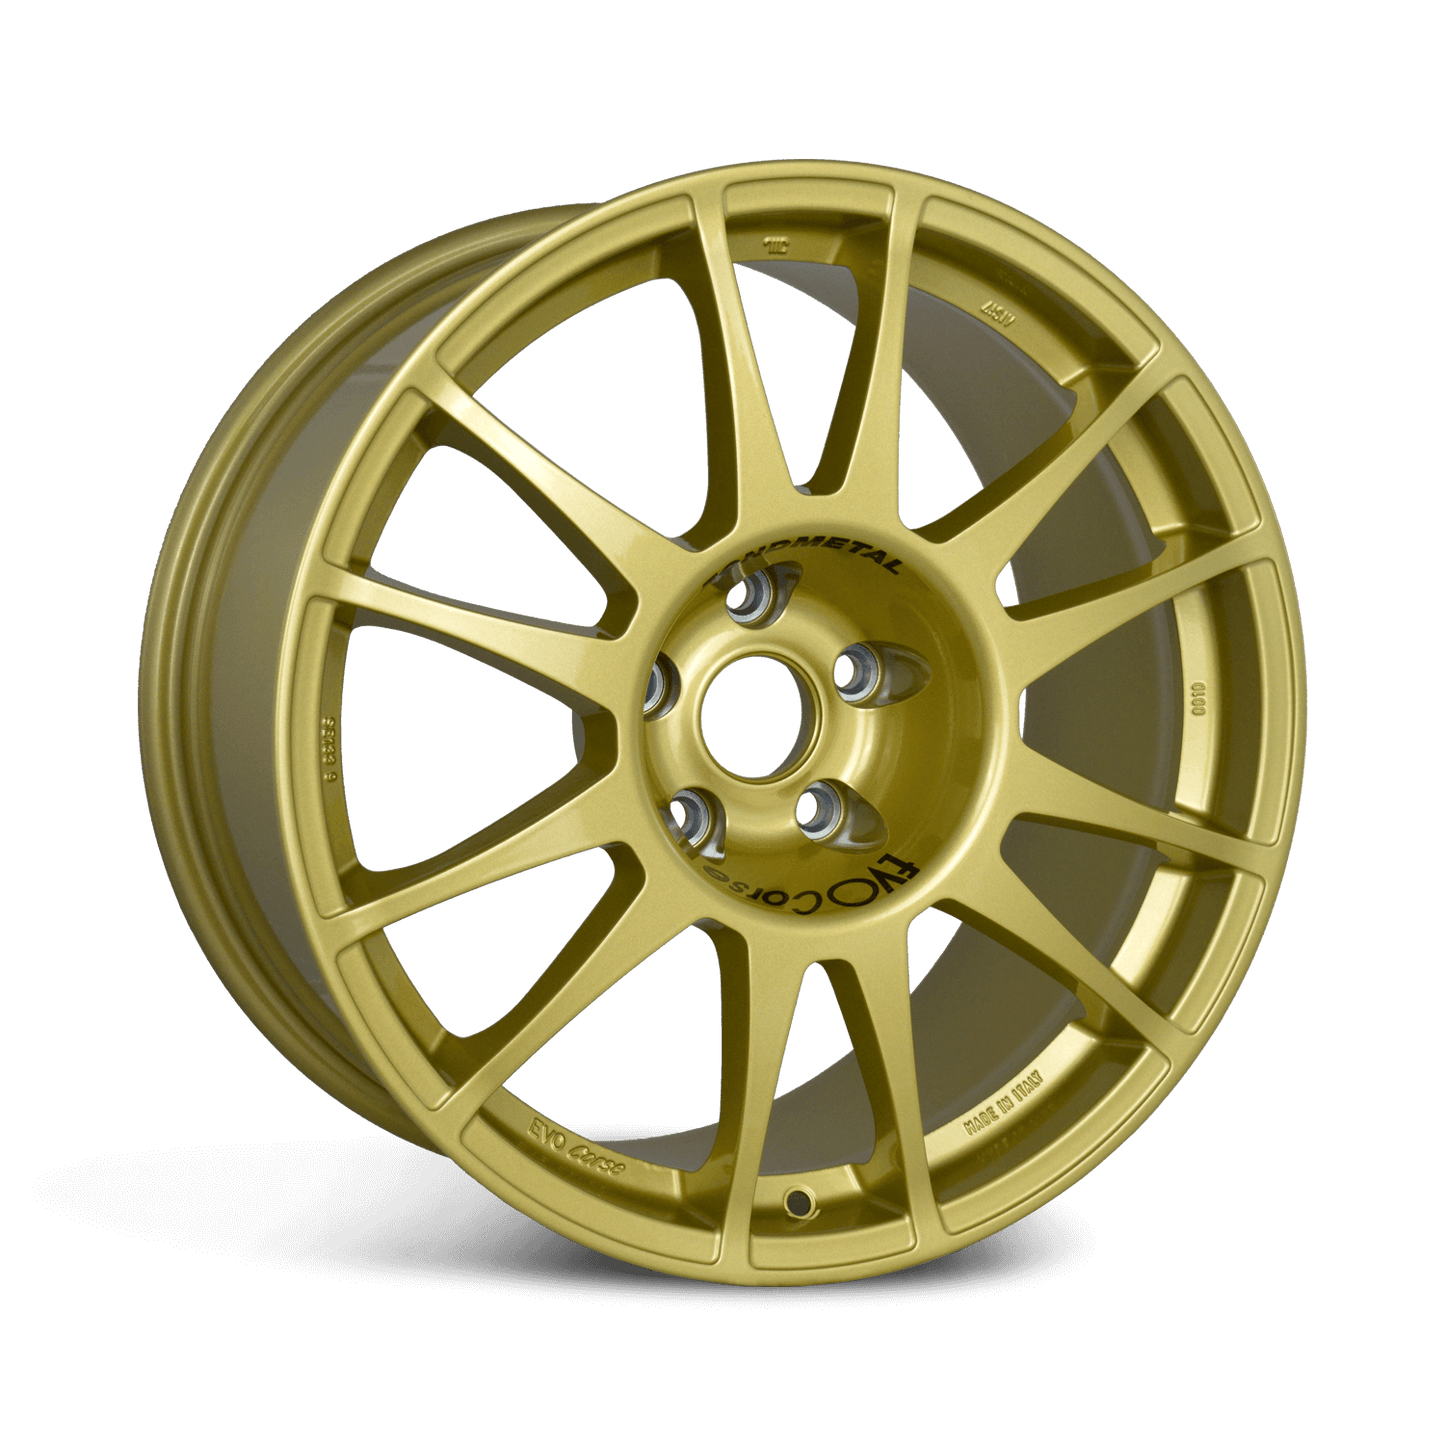 Front view of a Sanremo Corse 18-inch gold wheel with a 12-spoke design against a white background 